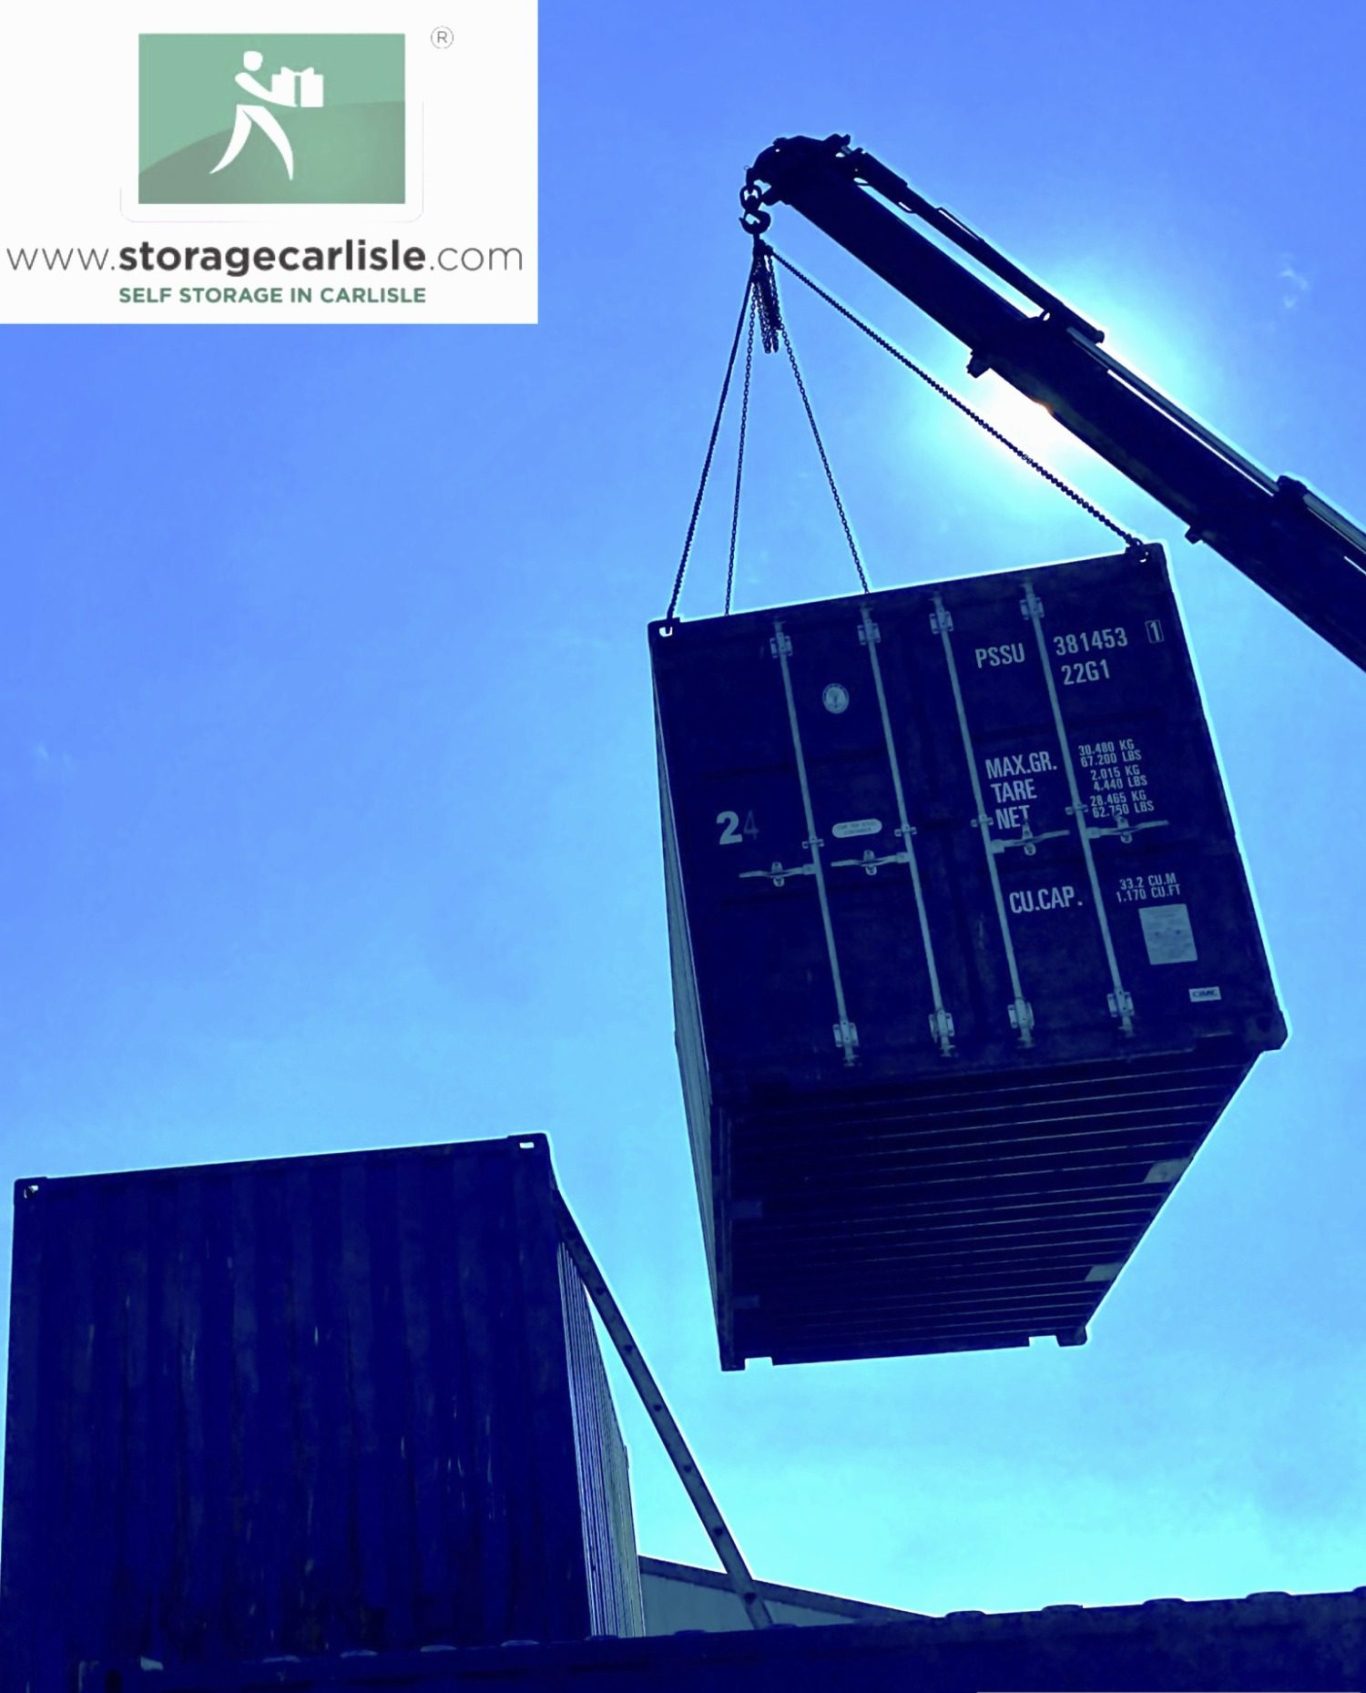 shipping container being sited